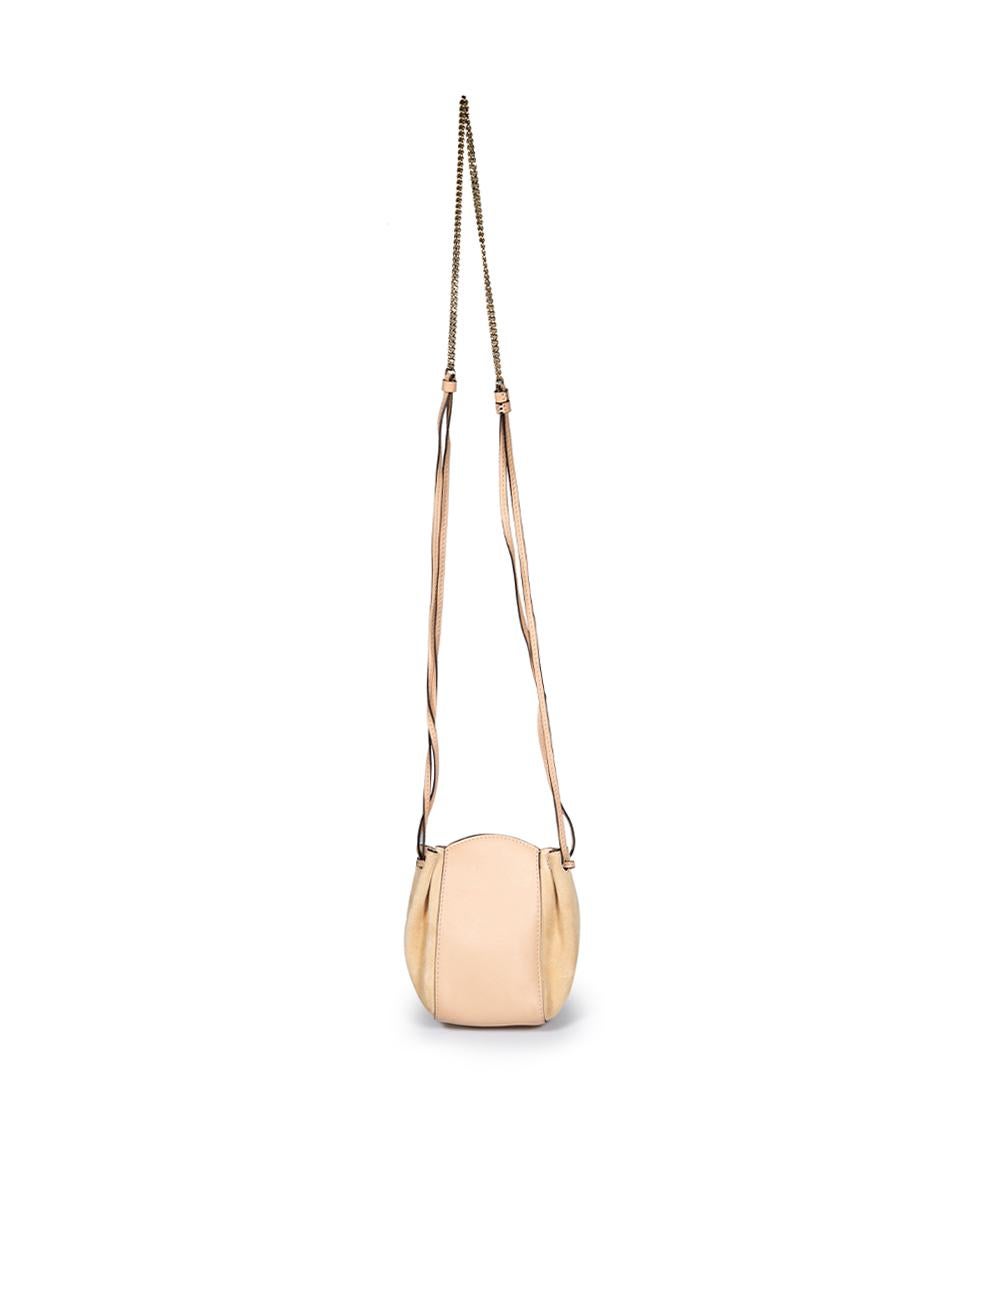 Chloe Beige Leather Mini Sac Drawstring Bag In Excellent Condition For Sale In London, GB